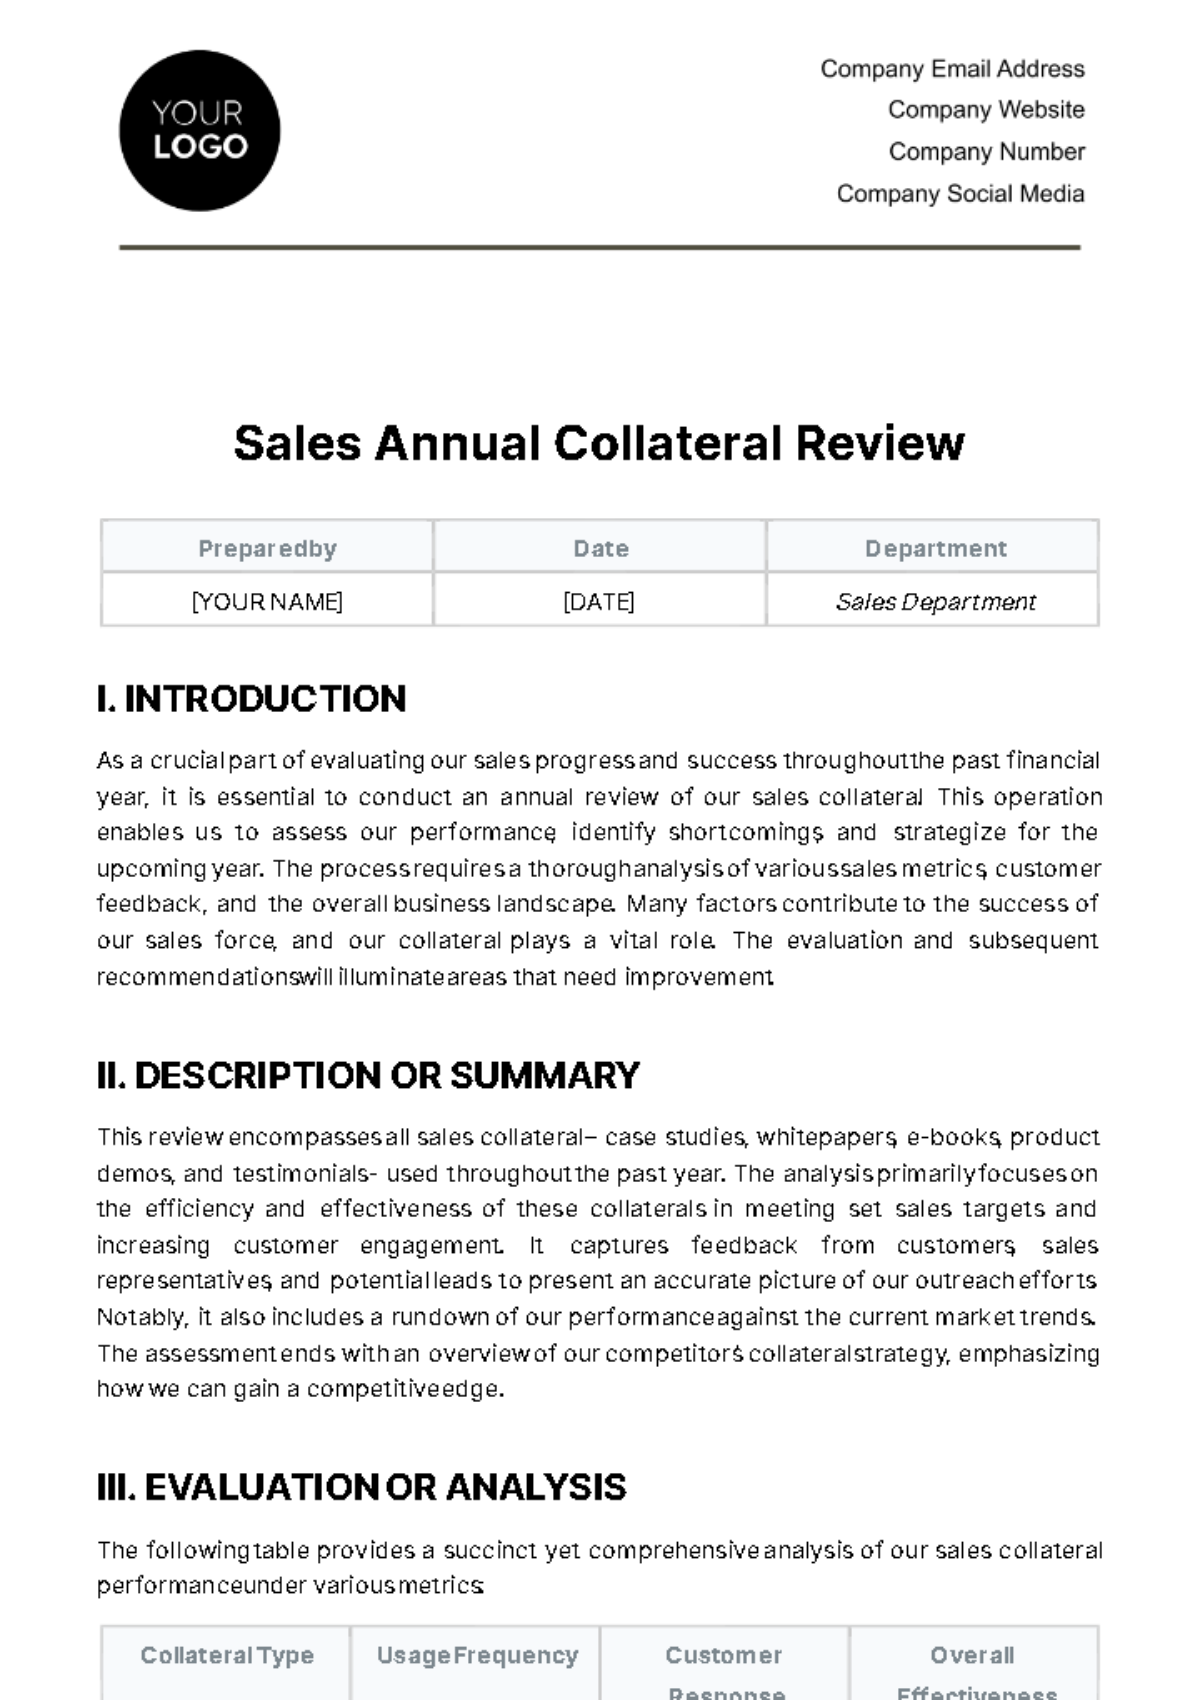 Free Sales Annual Collateral Review Template